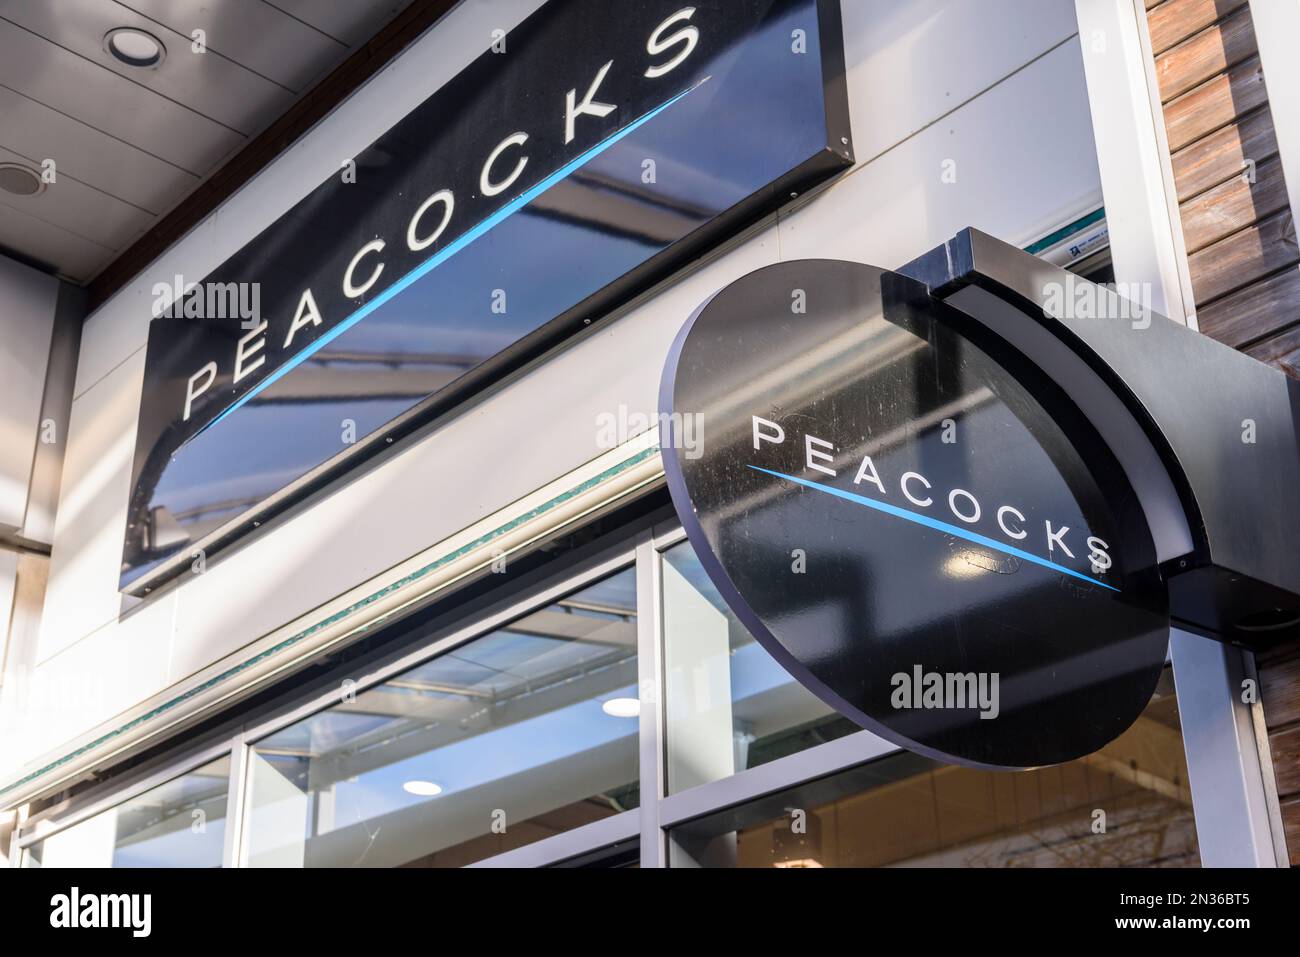 Peacock's outlet store, The Boulevard Outlet centre, Banbridge, Northern Ireland, United Kingdom, UK Stock Photo